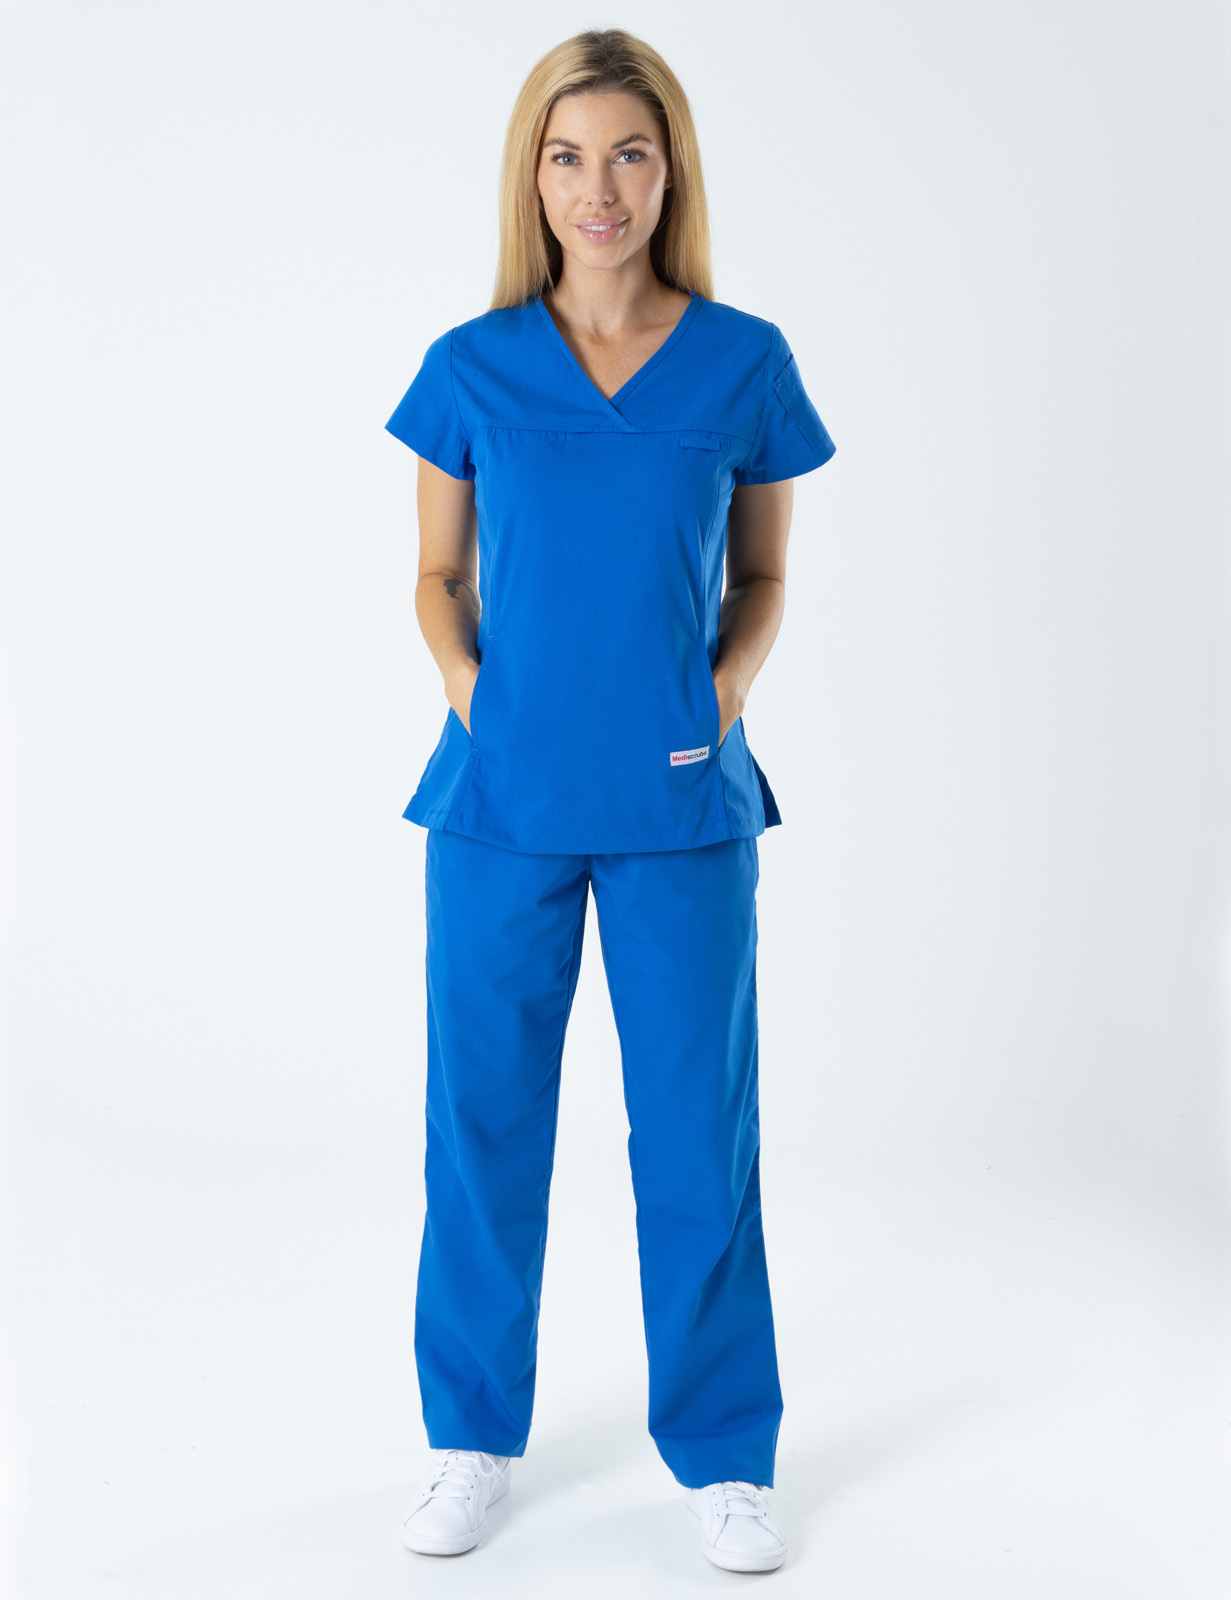 Logan Hospital - ED (Women's Fit Solid Top and Cargo Pants in Royal incl Logos)